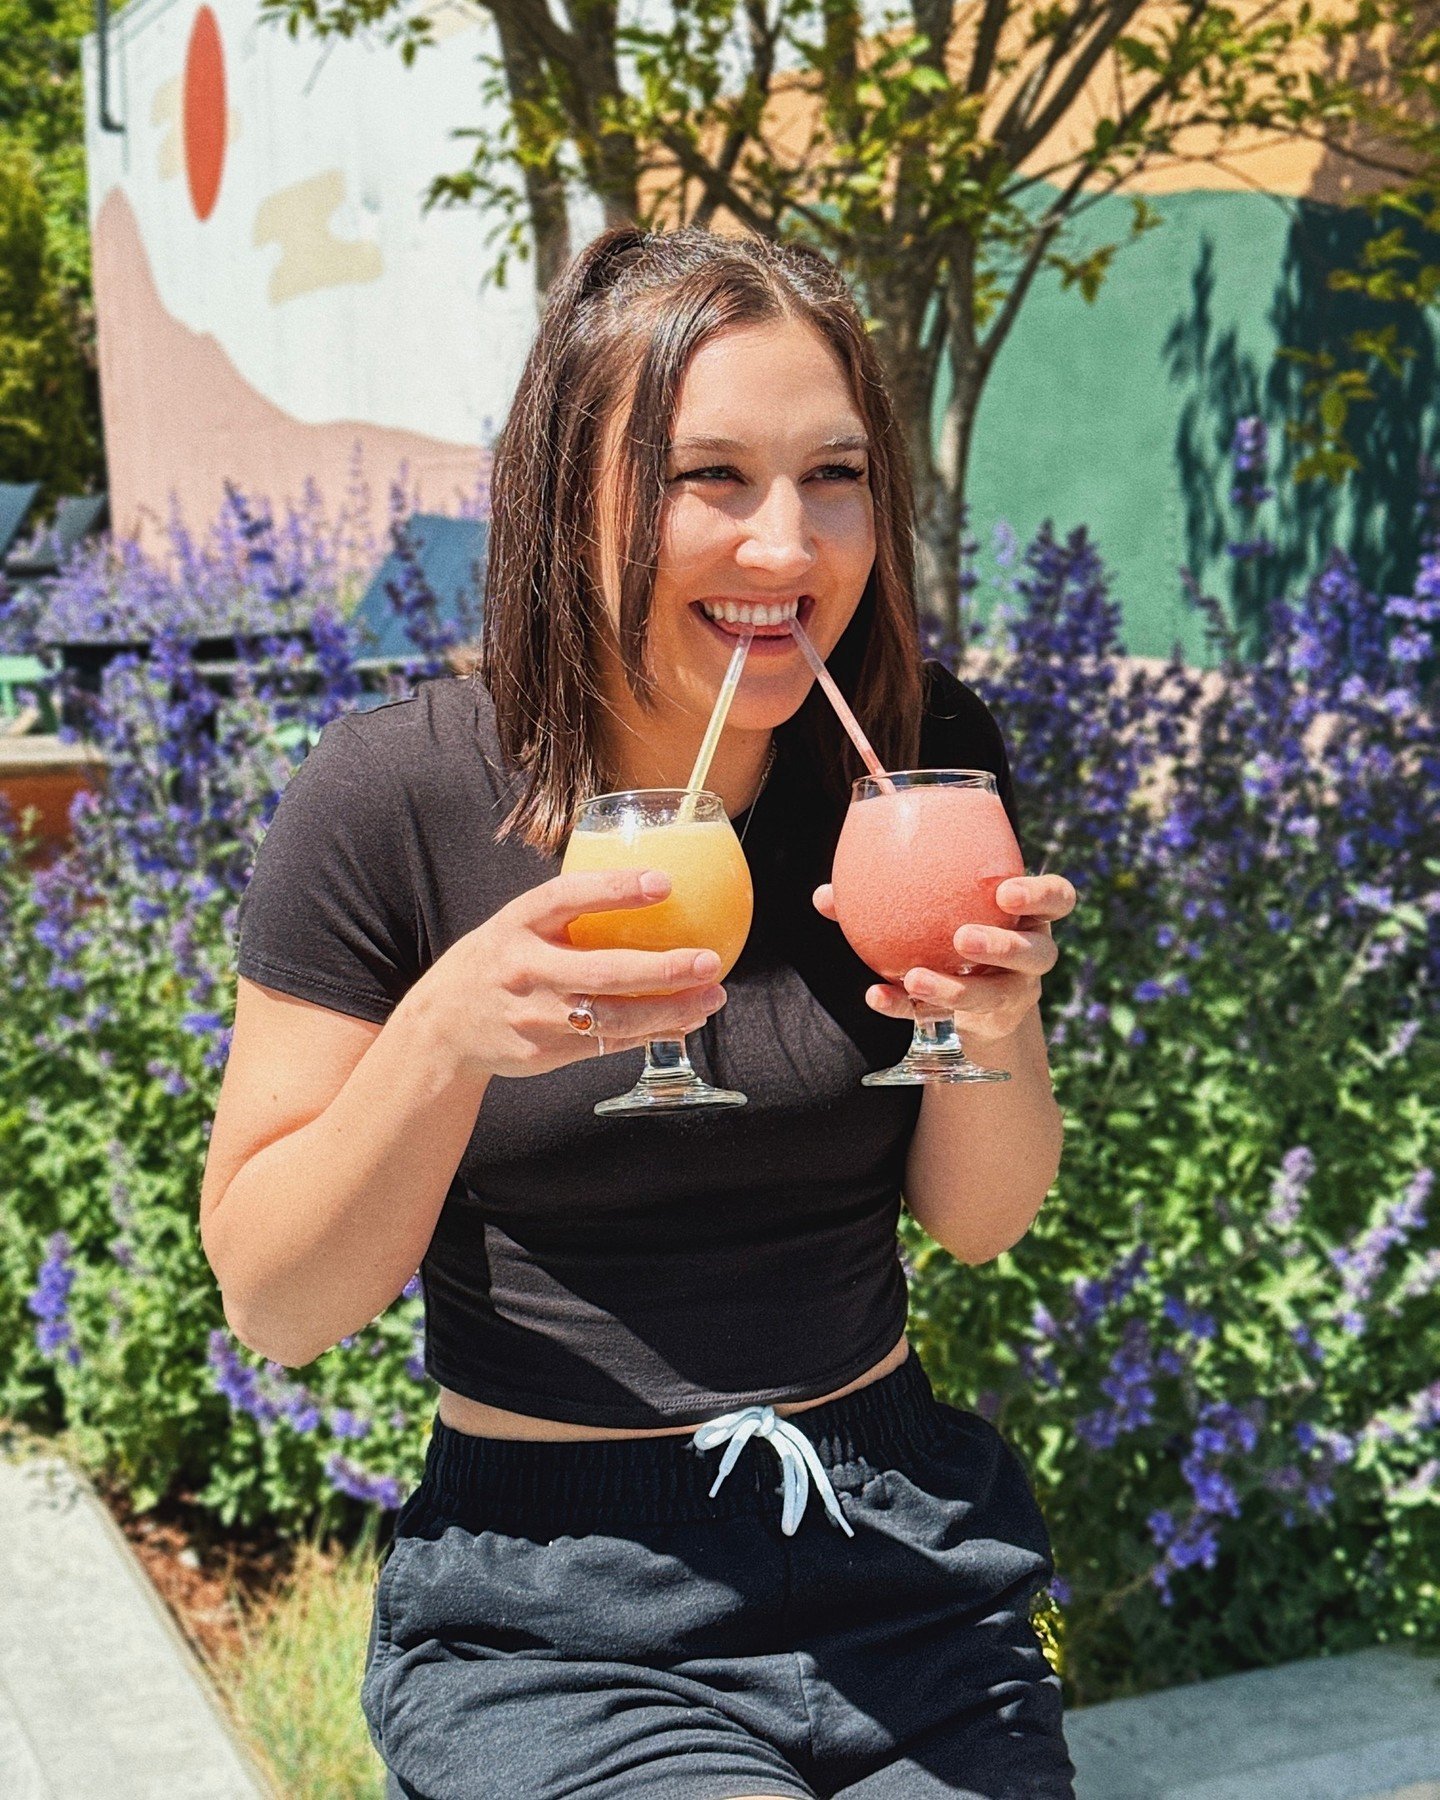 Craving a refreshing way to beat the heat? Our Fros&eacute; and POG cider slushies are the coolest way to do it! Made with crisp, cold cider and blended to perfection, they're the ultimate refreshment on a hot 80-degree day. 🍹⁠
⁠
Our taproom is open